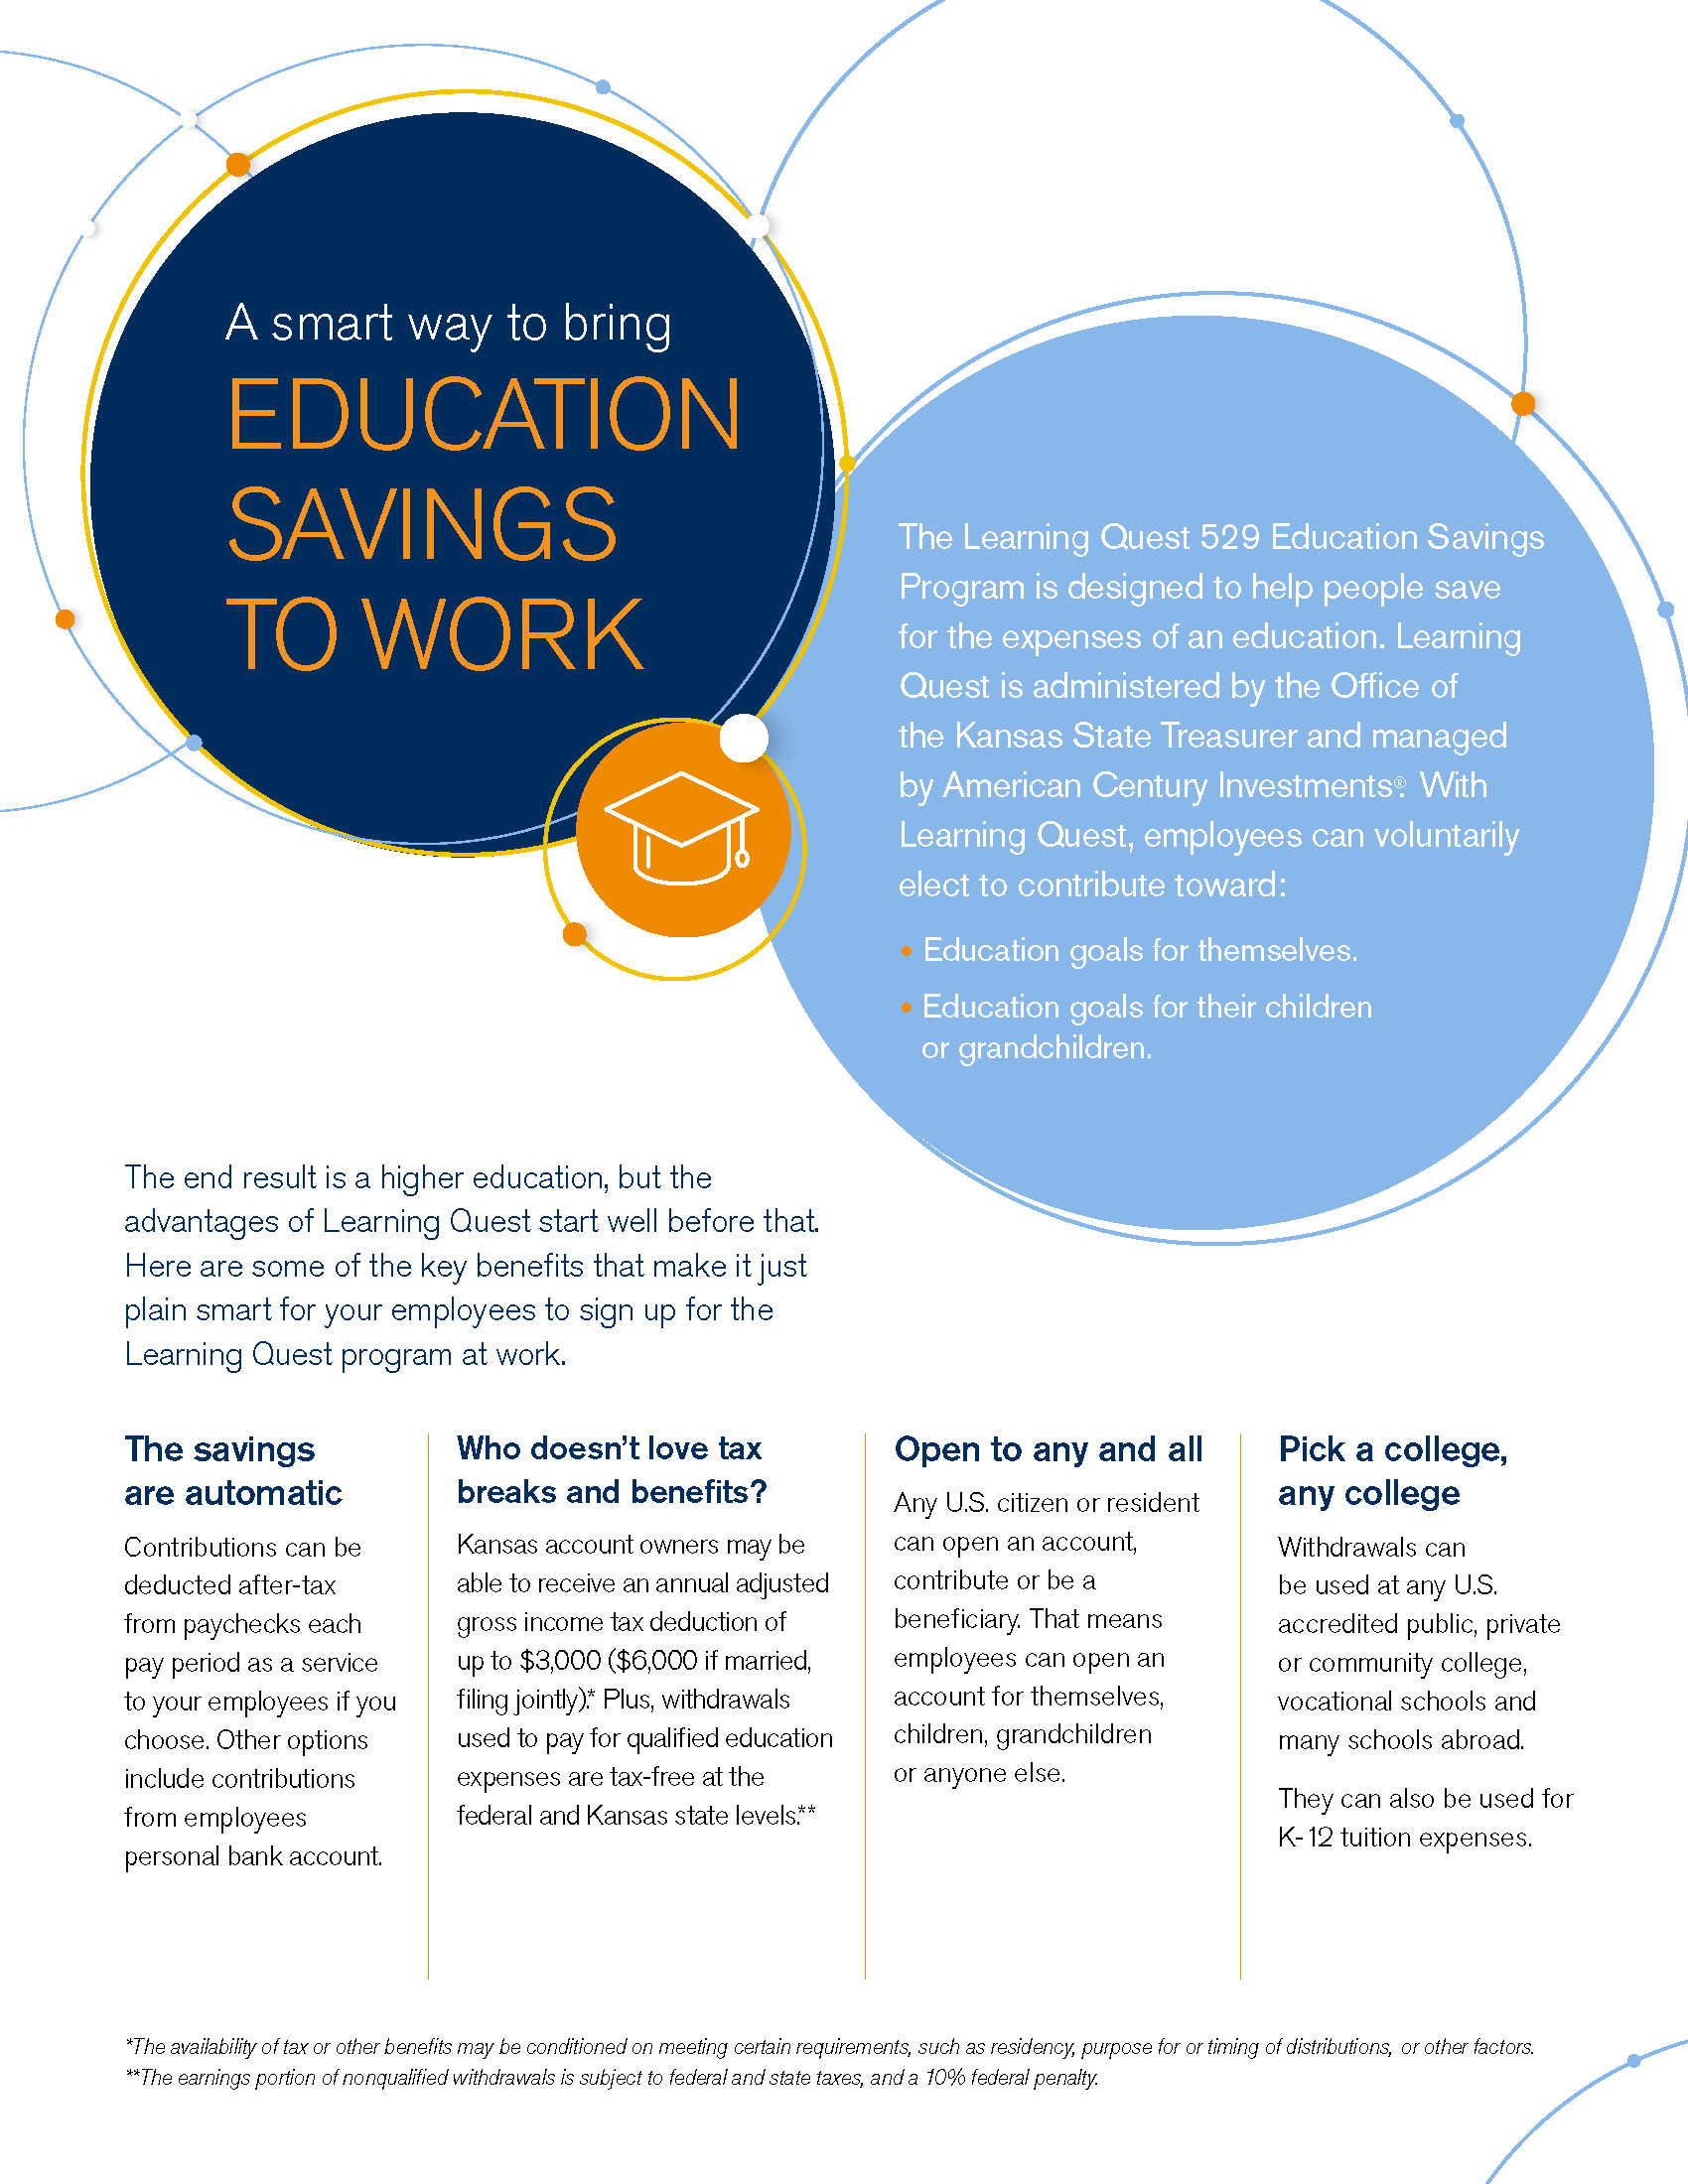 What is Learning Quest 529 Education Savings Program?